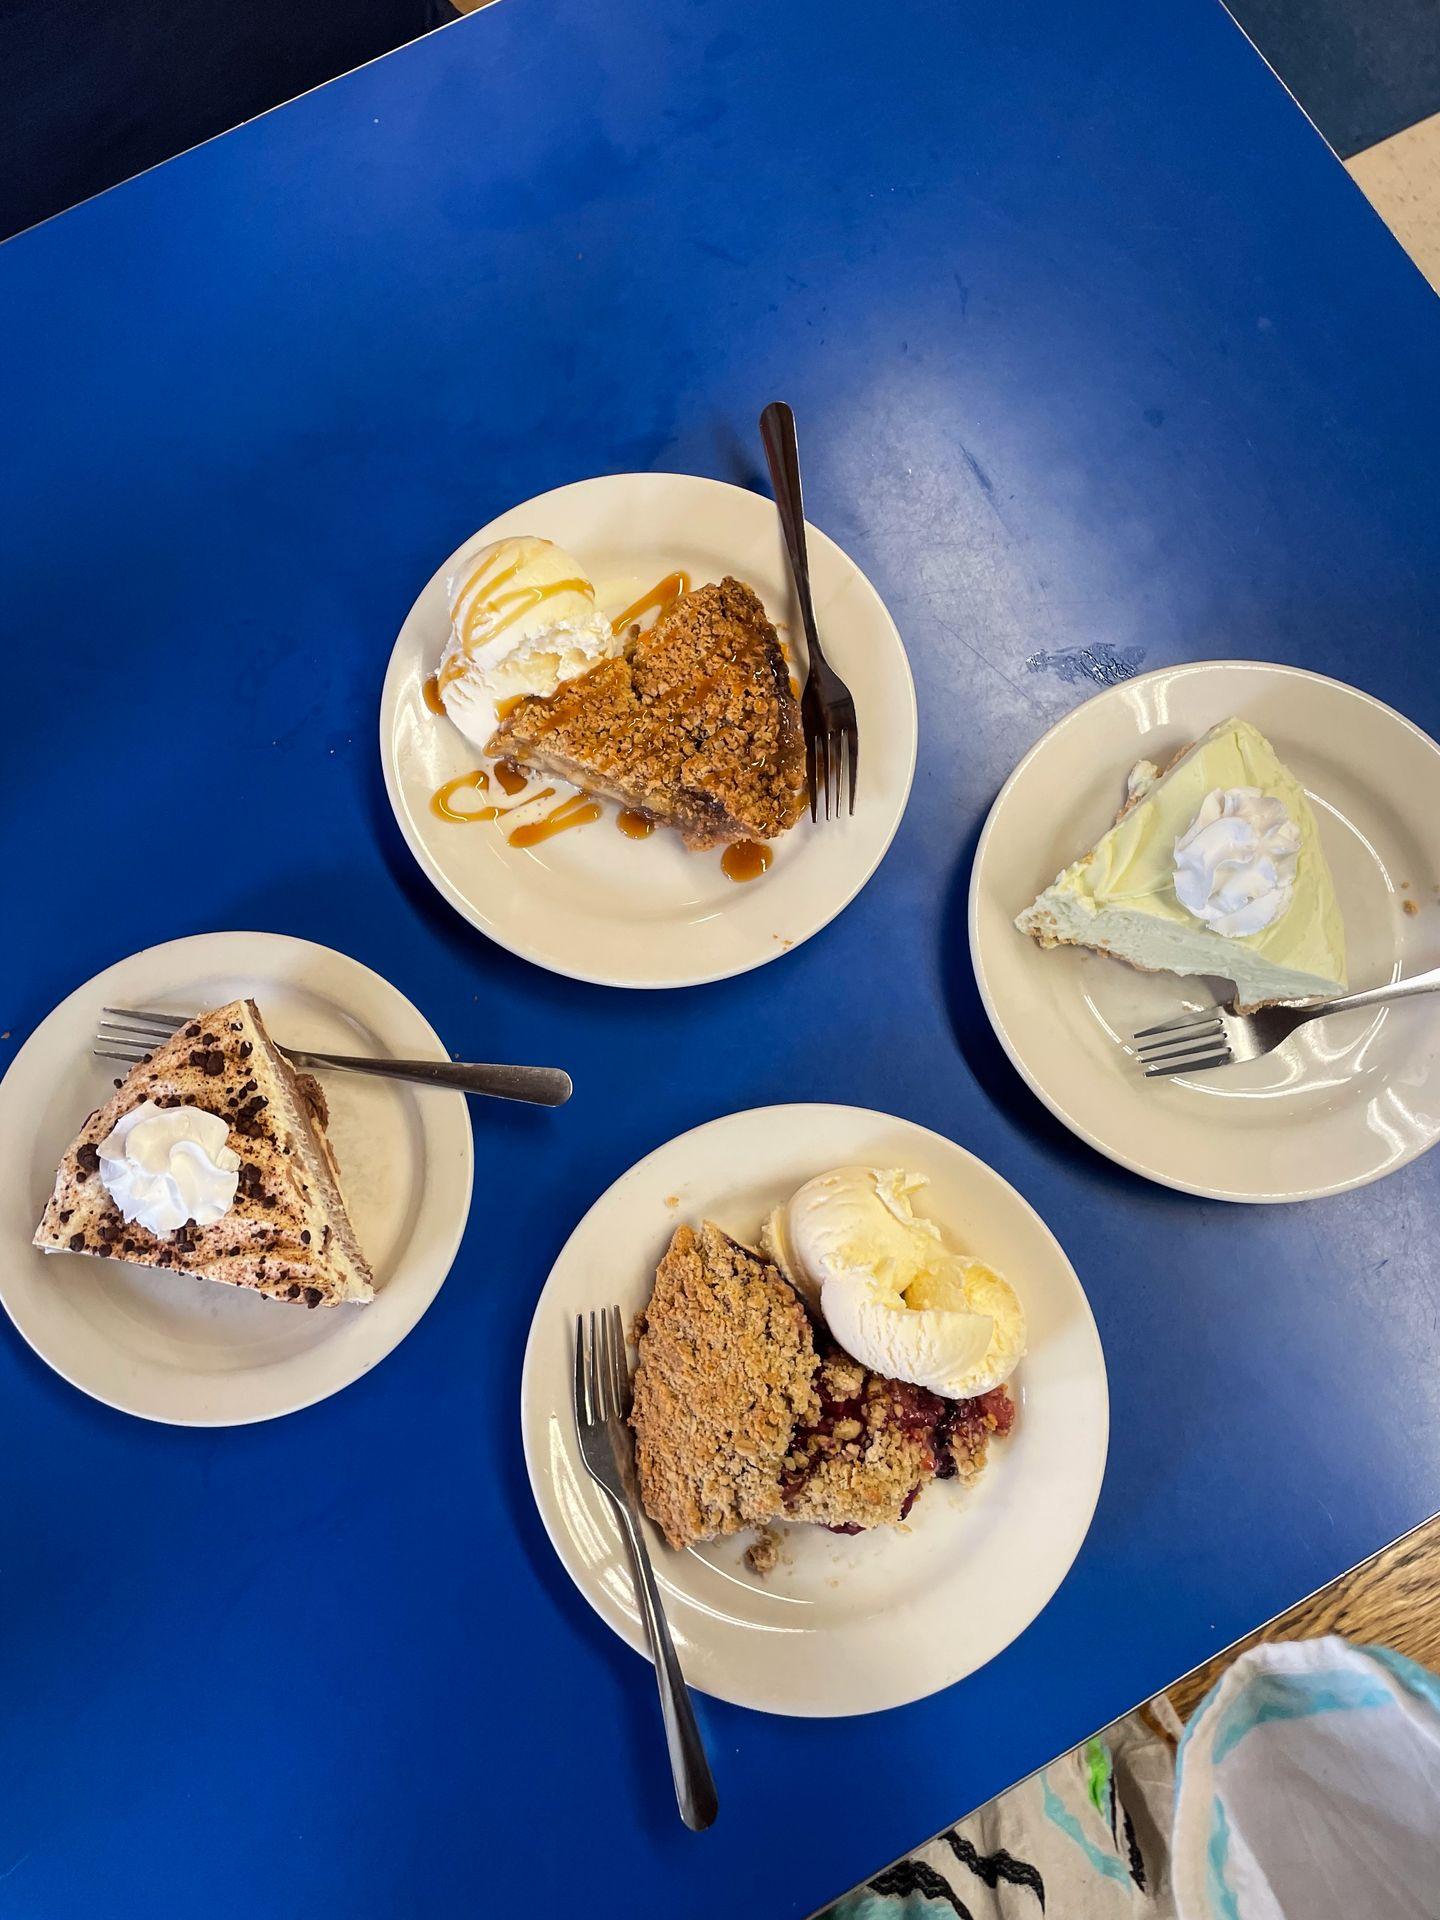 Four slices of pie from Betty's Pies. There are 2 fruit pies, a key lime pie and a chocolate pie. Two are served with ice cream